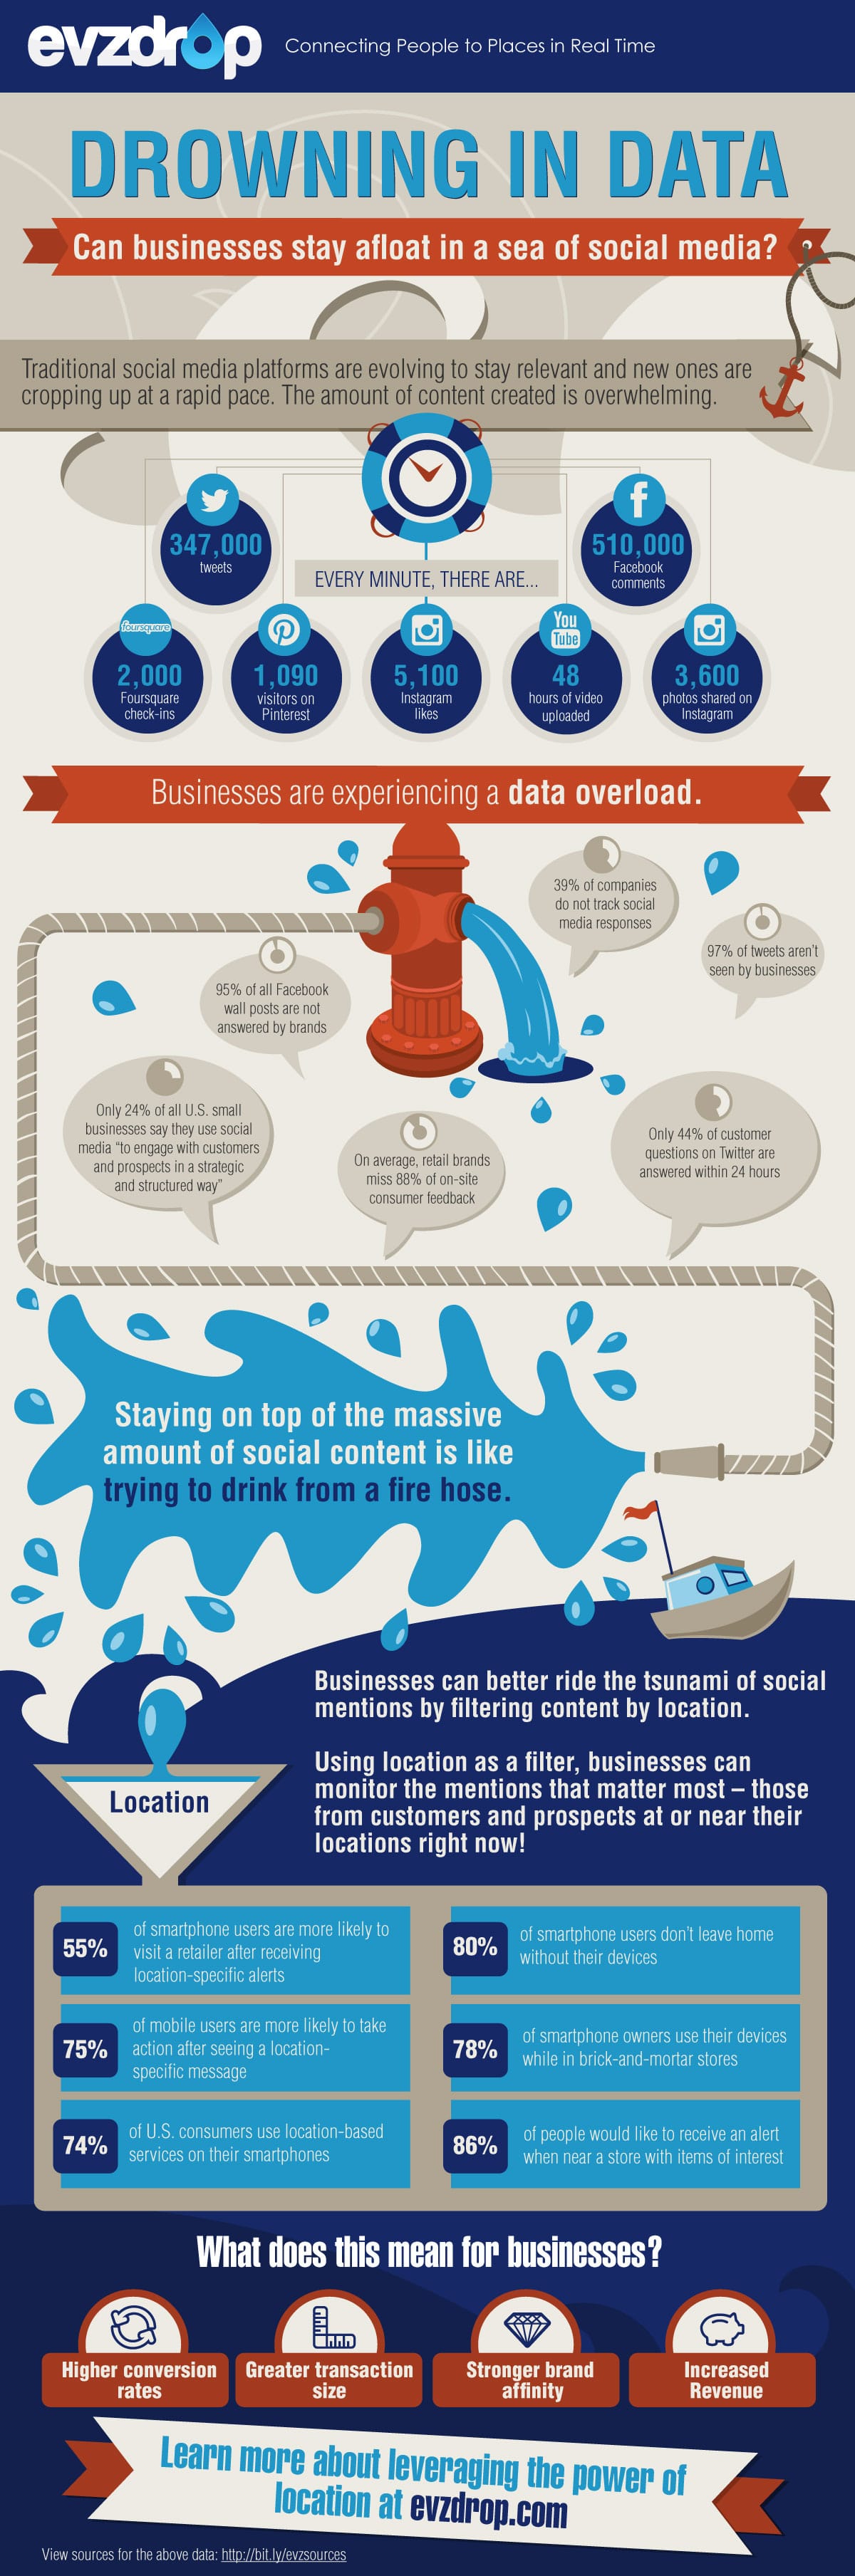 Local Businesses: Simple Solution To Win In Social Media [Infographic]